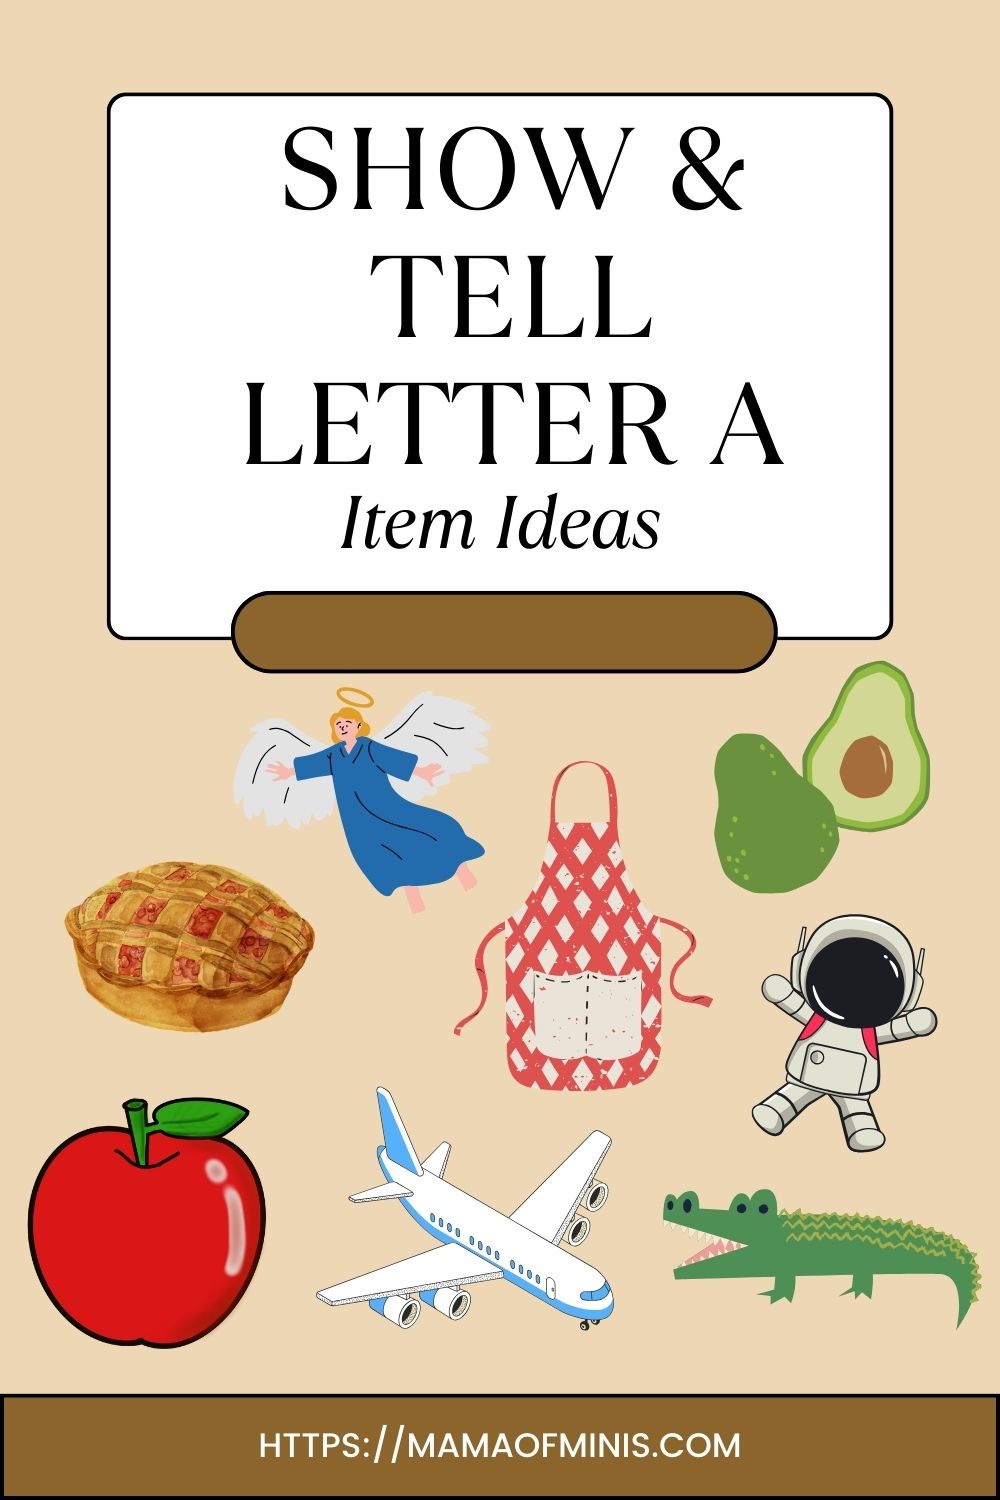 Item Ideas for Show and Tell Letter A